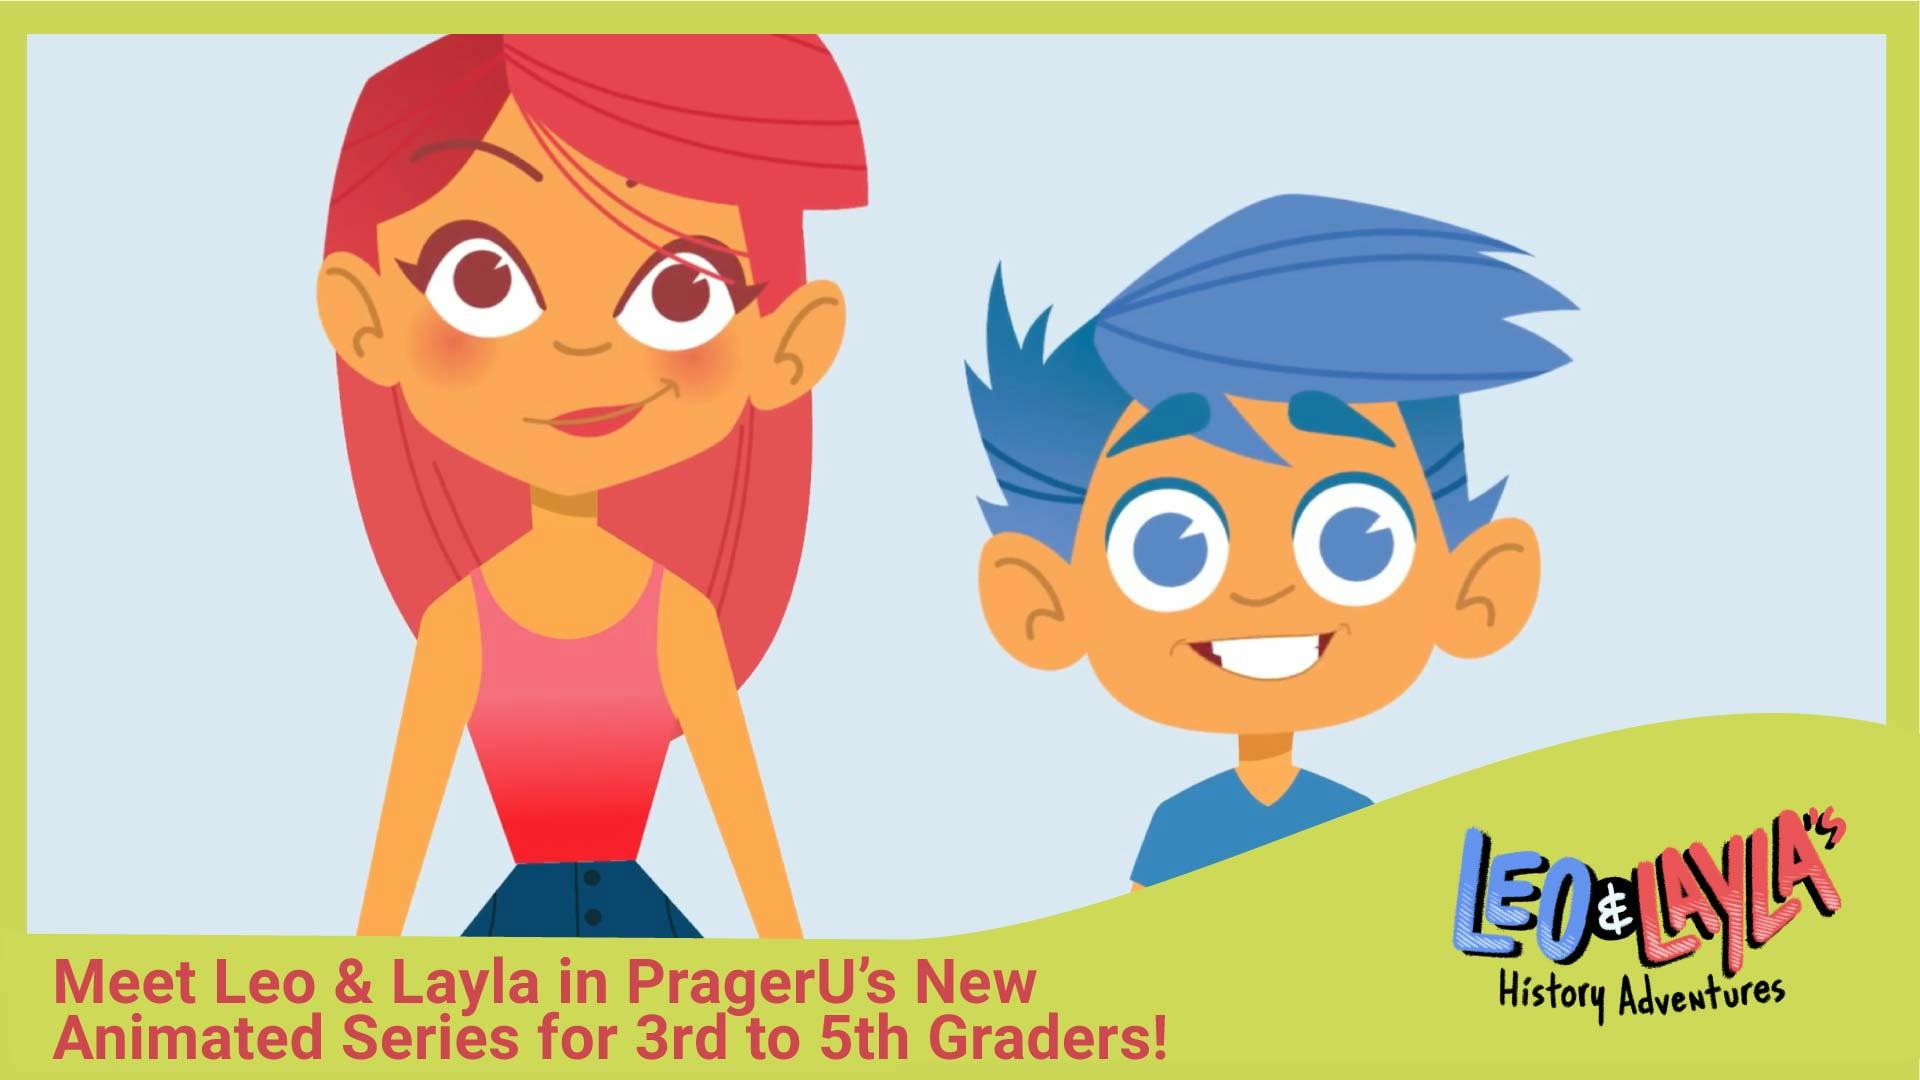 Meet Leo & Layla in PragerU’s New Animated Series for 3rd to 5th Graders!